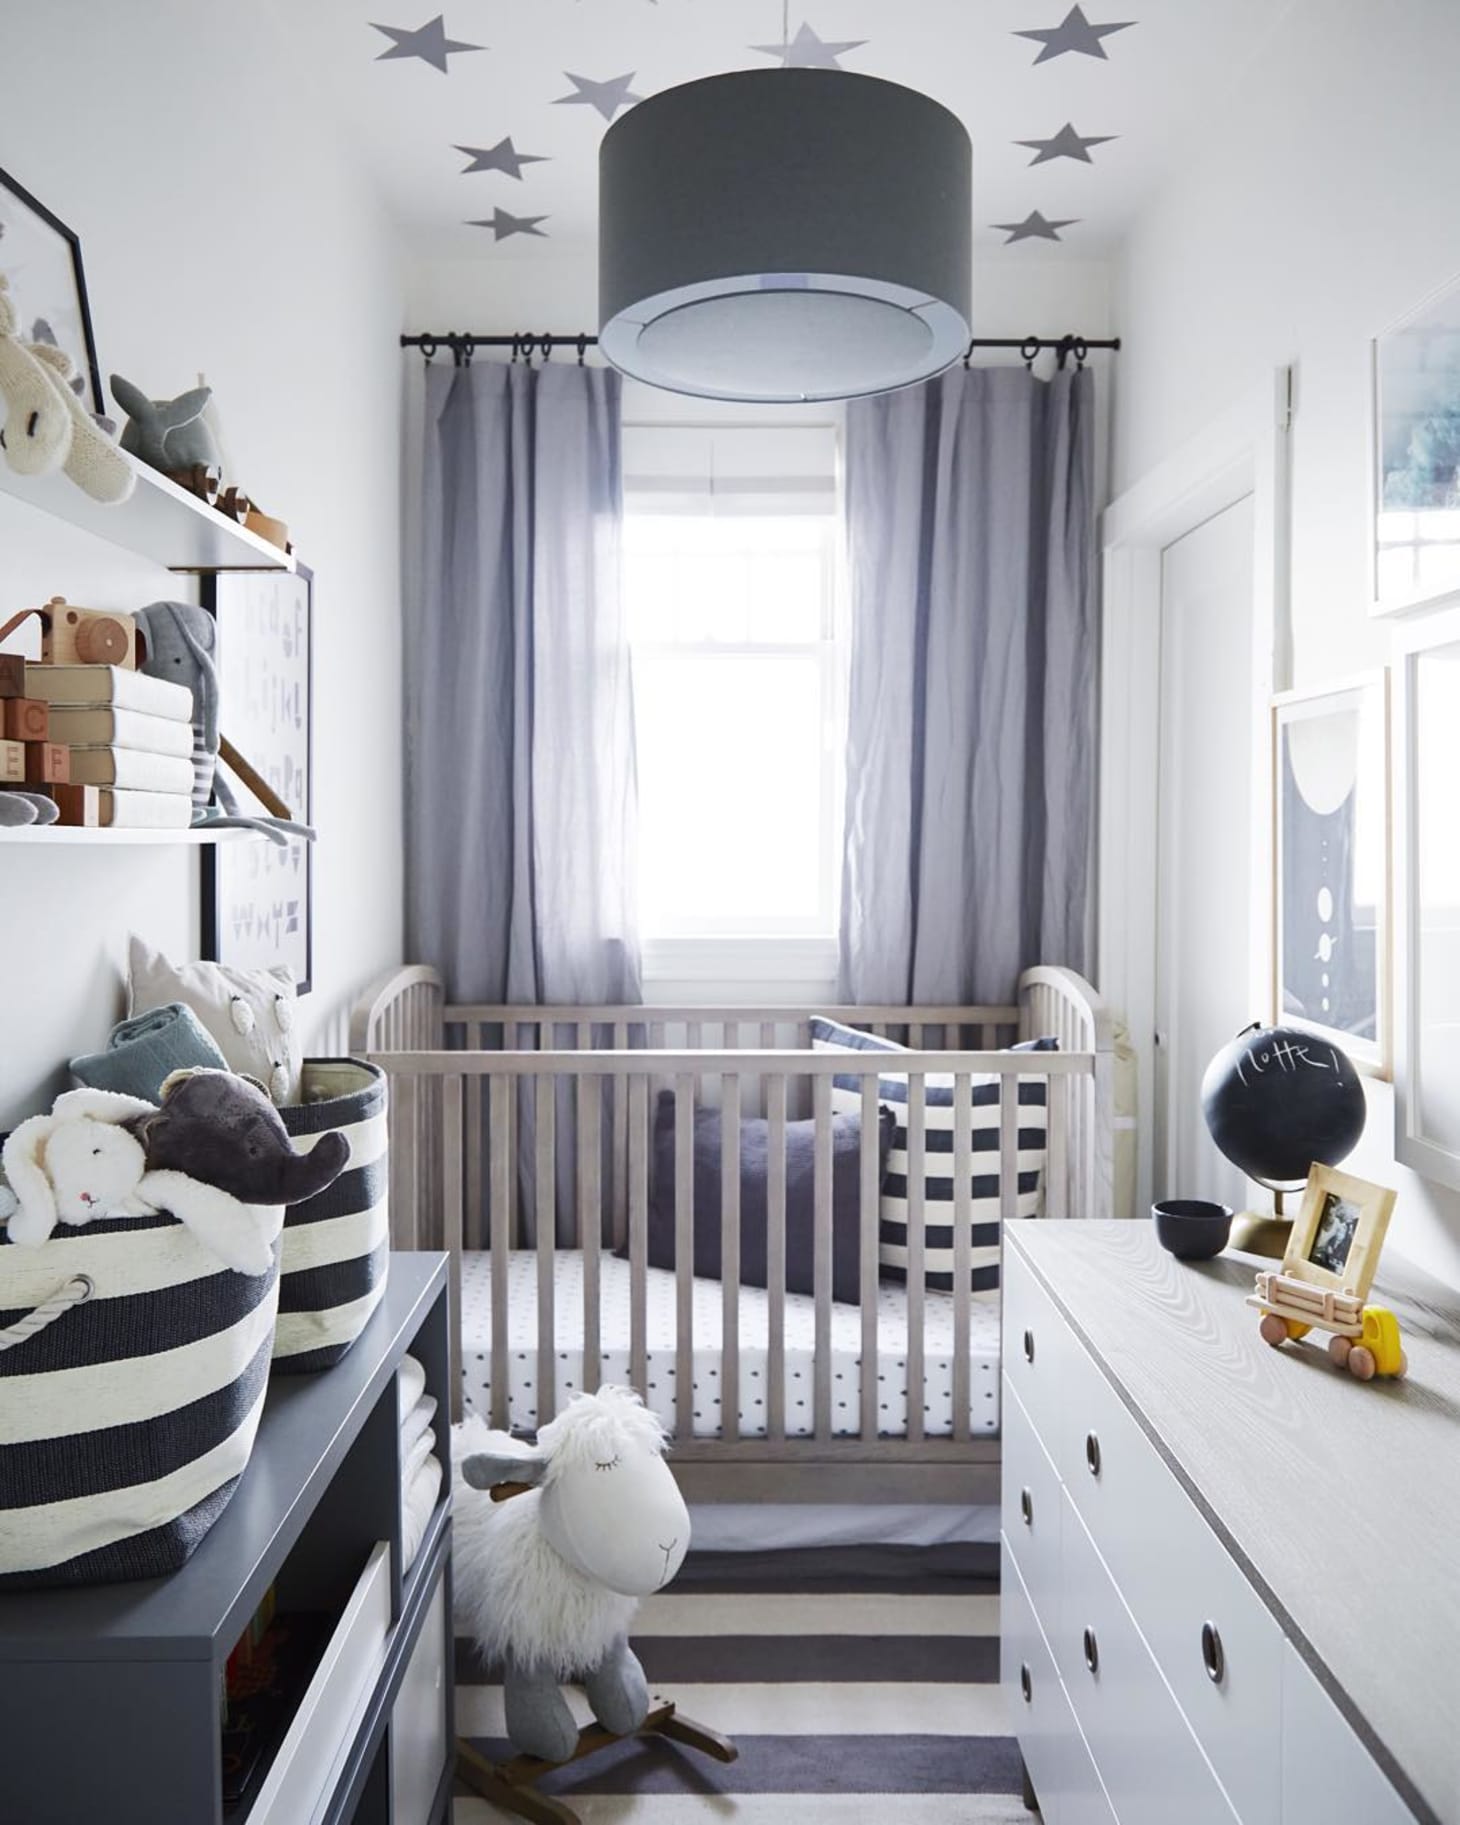 How To Fit A Nursery Into Your Very Small Space Apartment